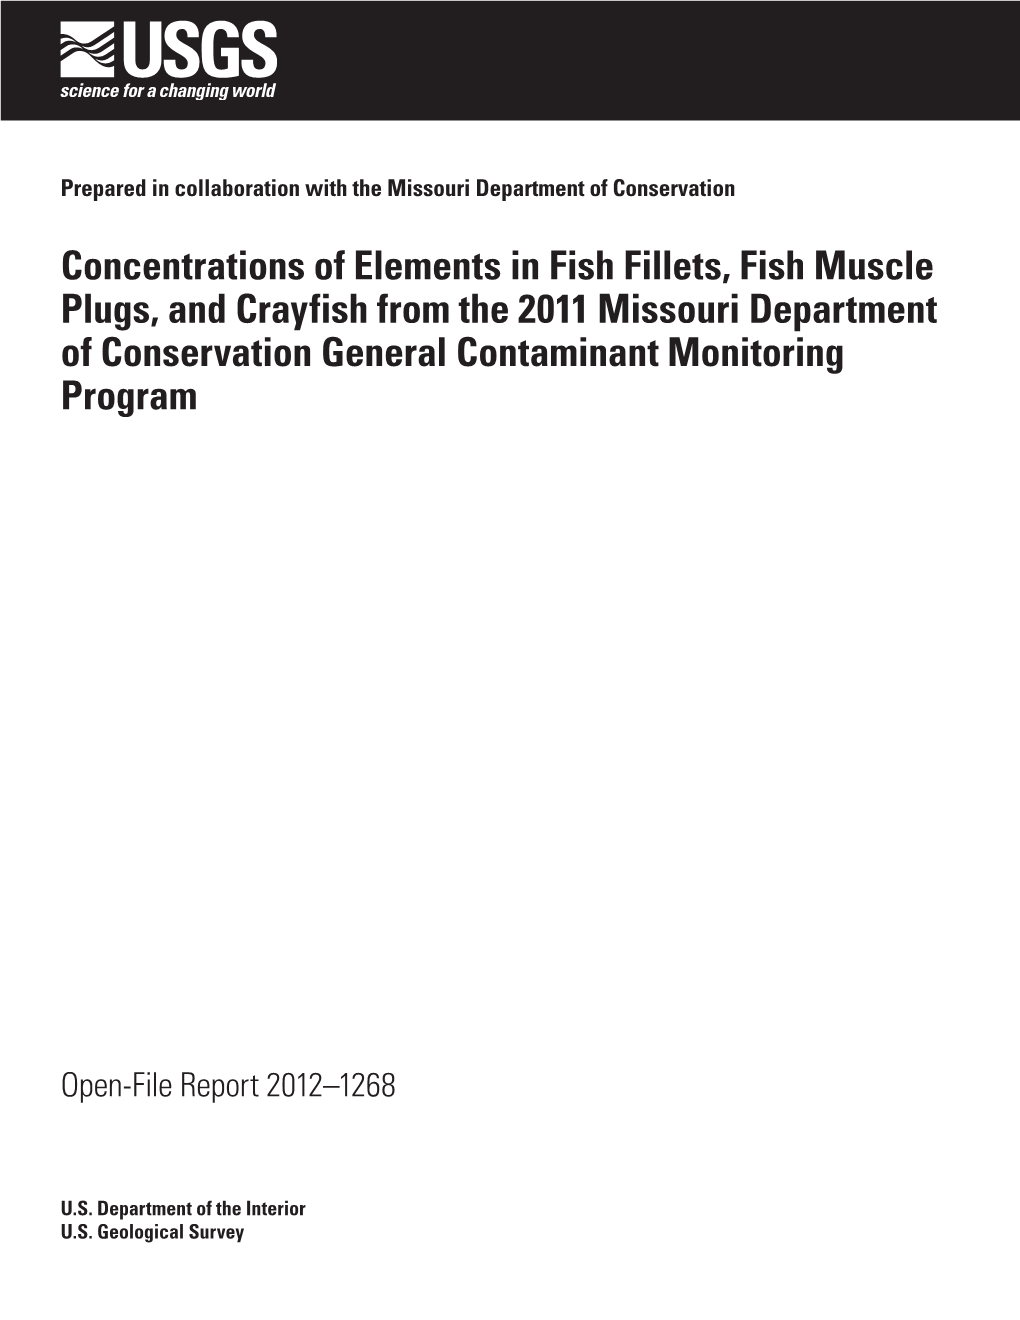 Concentrations of Elements in Fish Fillets, Fish Muscle Plugs, and Crayfish from the 2011 Missouri Department of Conservation General Contaminant Monitoring Program